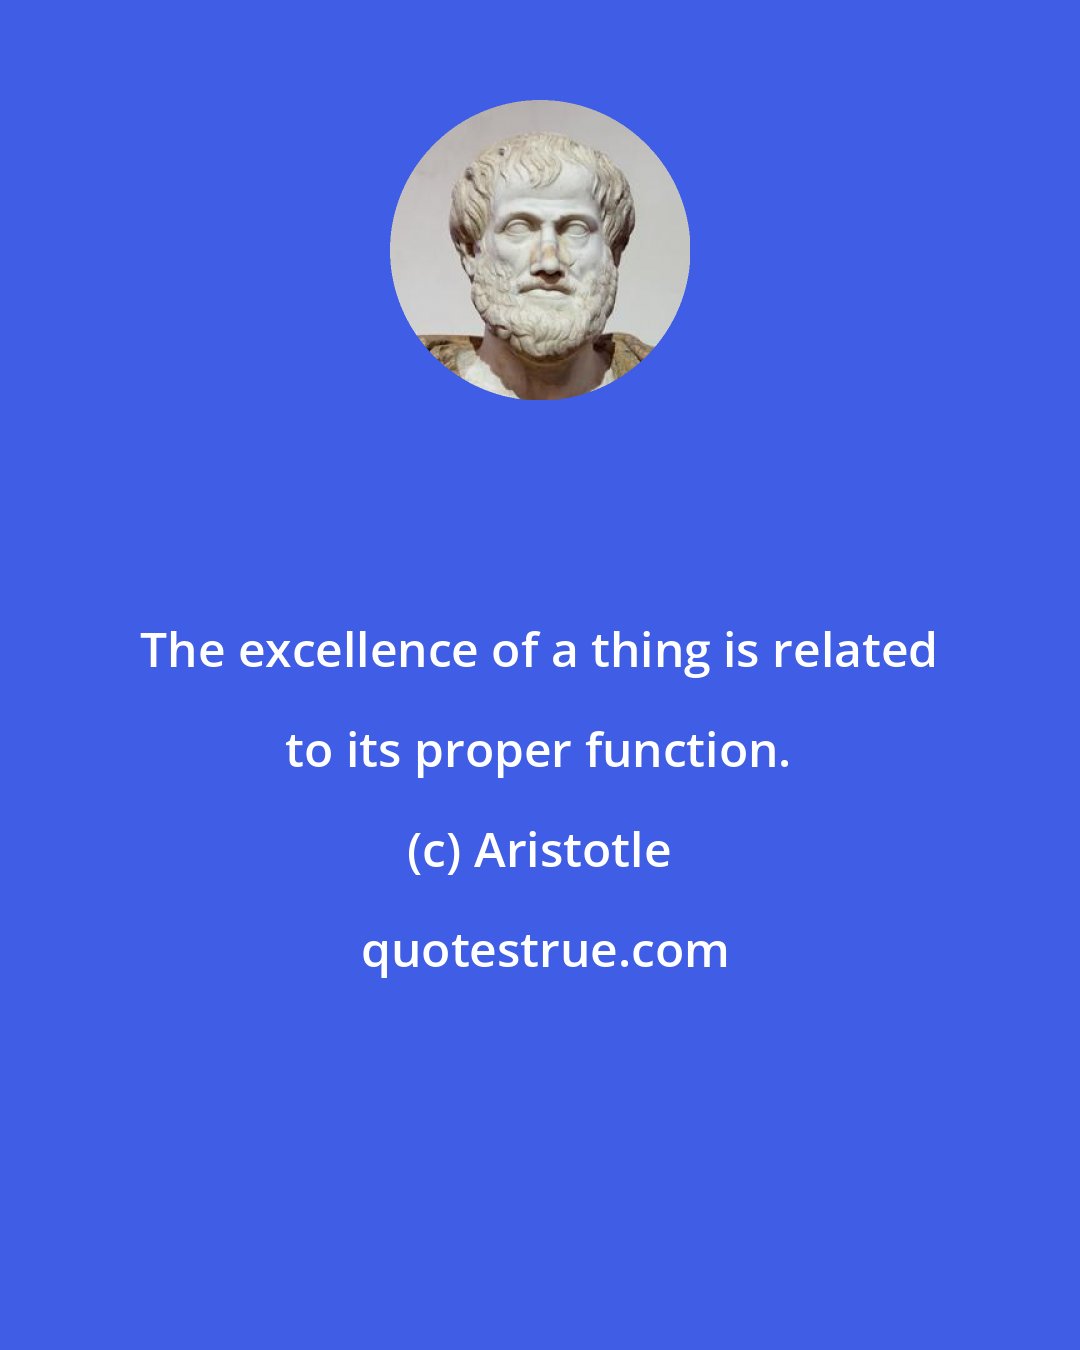 Aristotle: The excellence of a thing is related to its proper function.